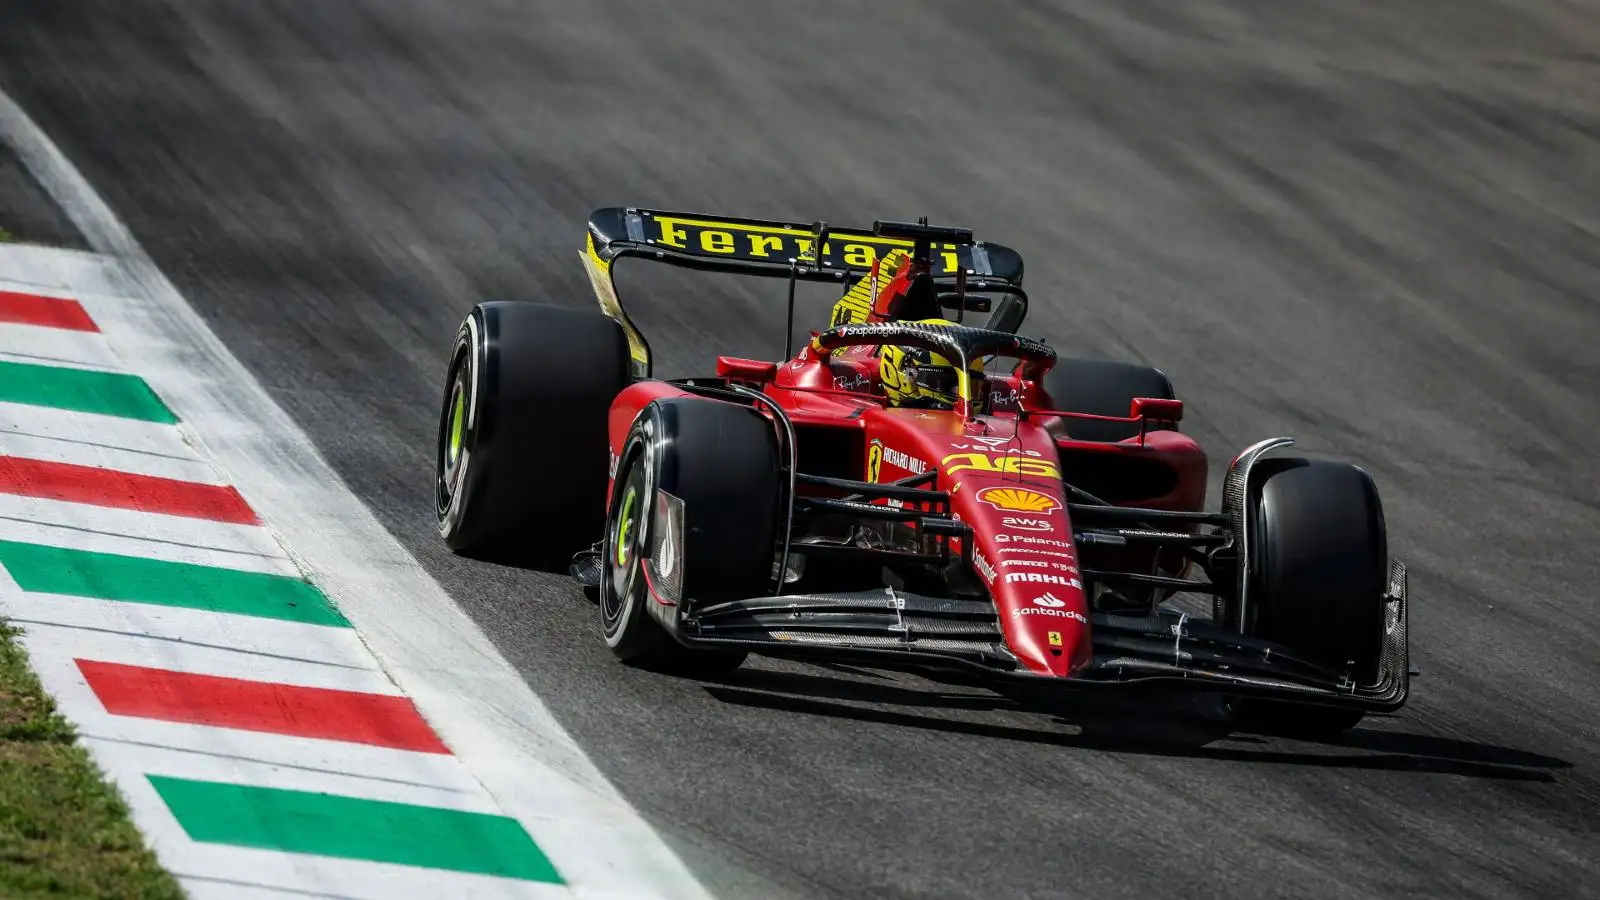 Charles Leclerc in special liveried Ferrari during FP1 for the Italian GP. Monza Italian Grand Prix September 2022.